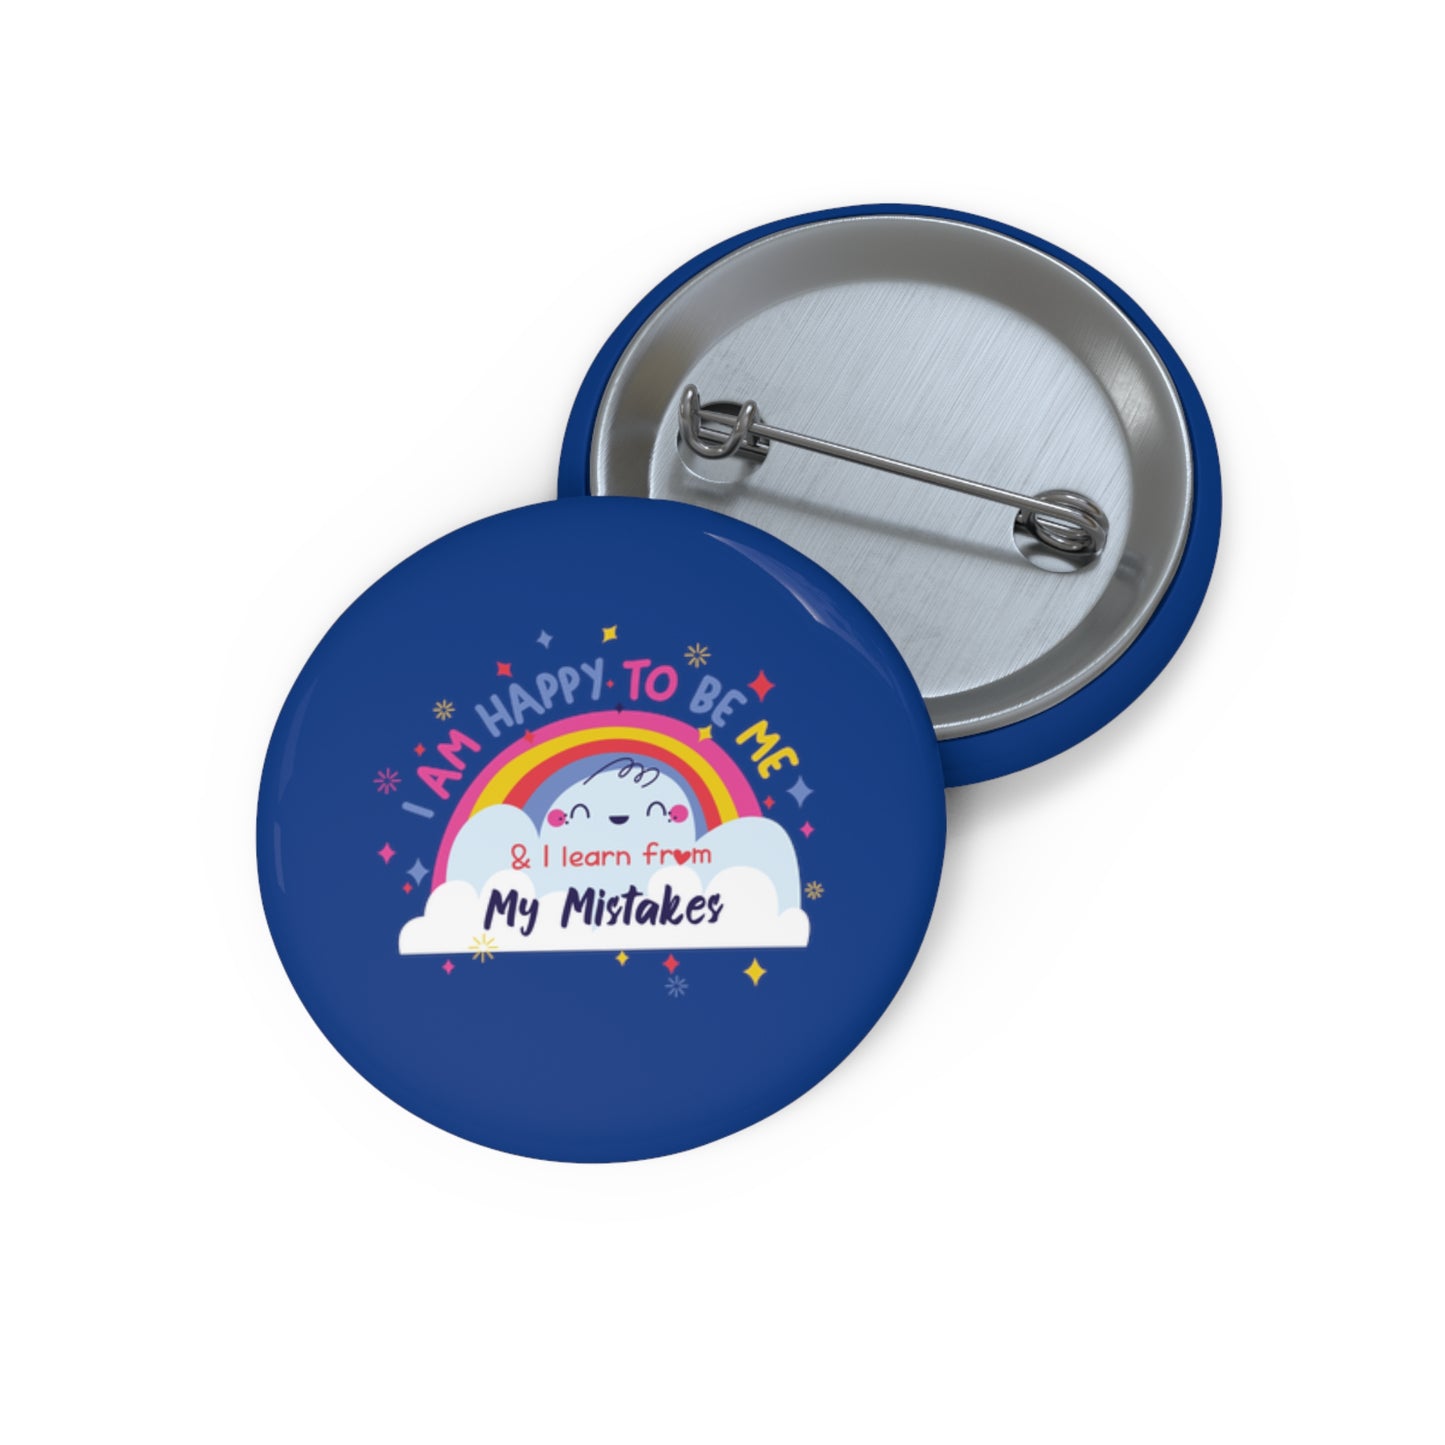 I Am Happy To Be Me - Custom Pin Buttons